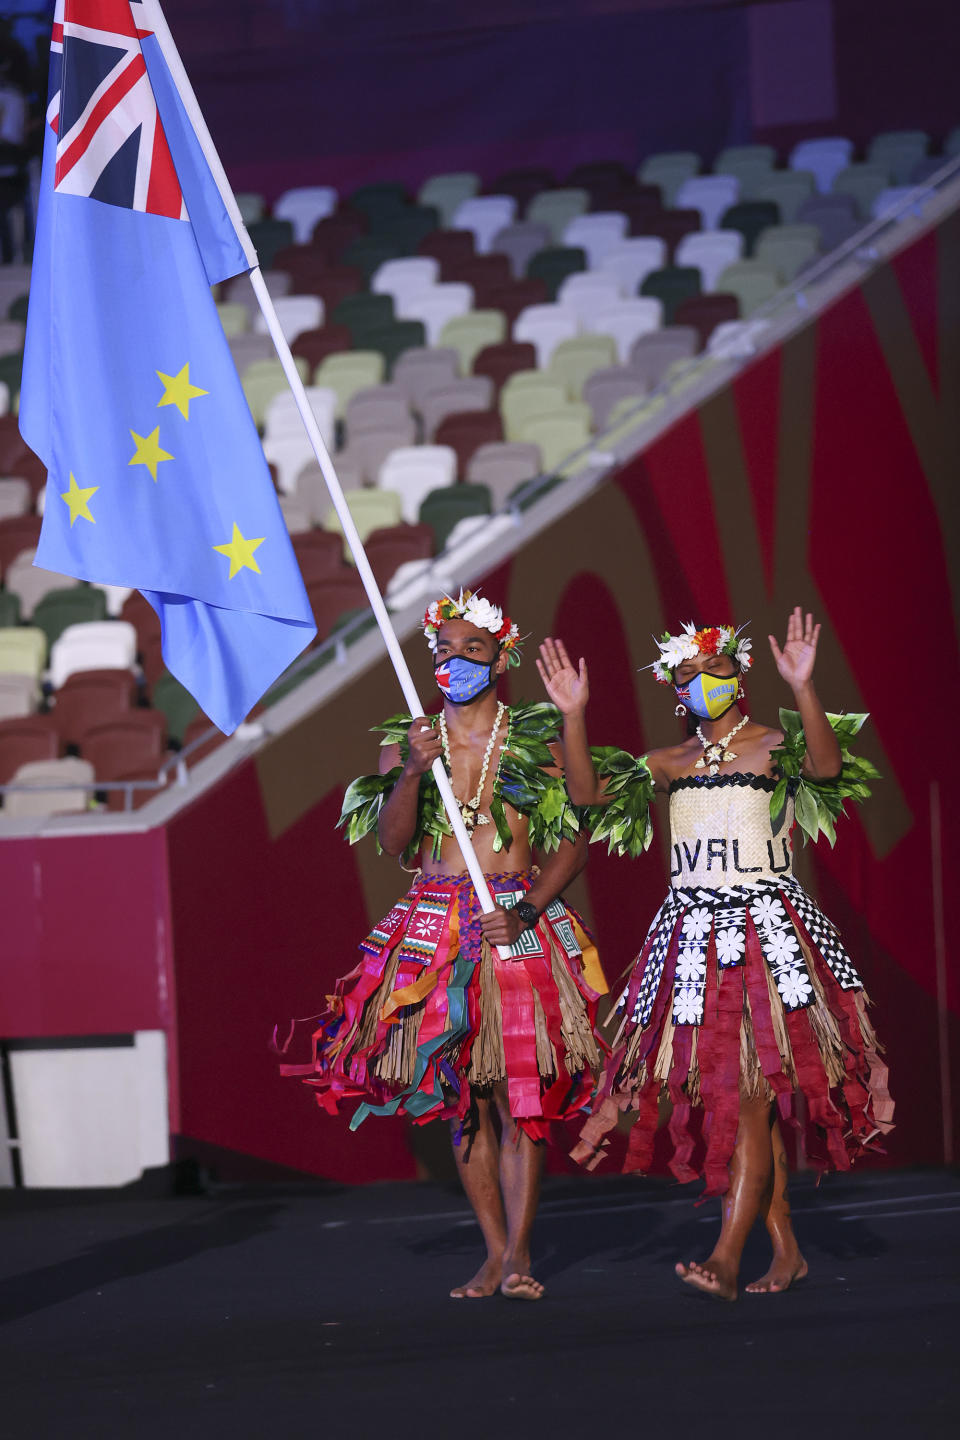 <p>TOKYO, JAPAN - JULY 23: Flag bearers Matie Stanley and Karalo Hepoiteloto Maibuca of Team Tuvalu during the Opening Ceremony of the Tokyo 2020 Olympic Games at Olympic Stadium on July 23, 2021 in Tokyo, Japan. (Photo by Jamie Squire/Getty Images)</p> 